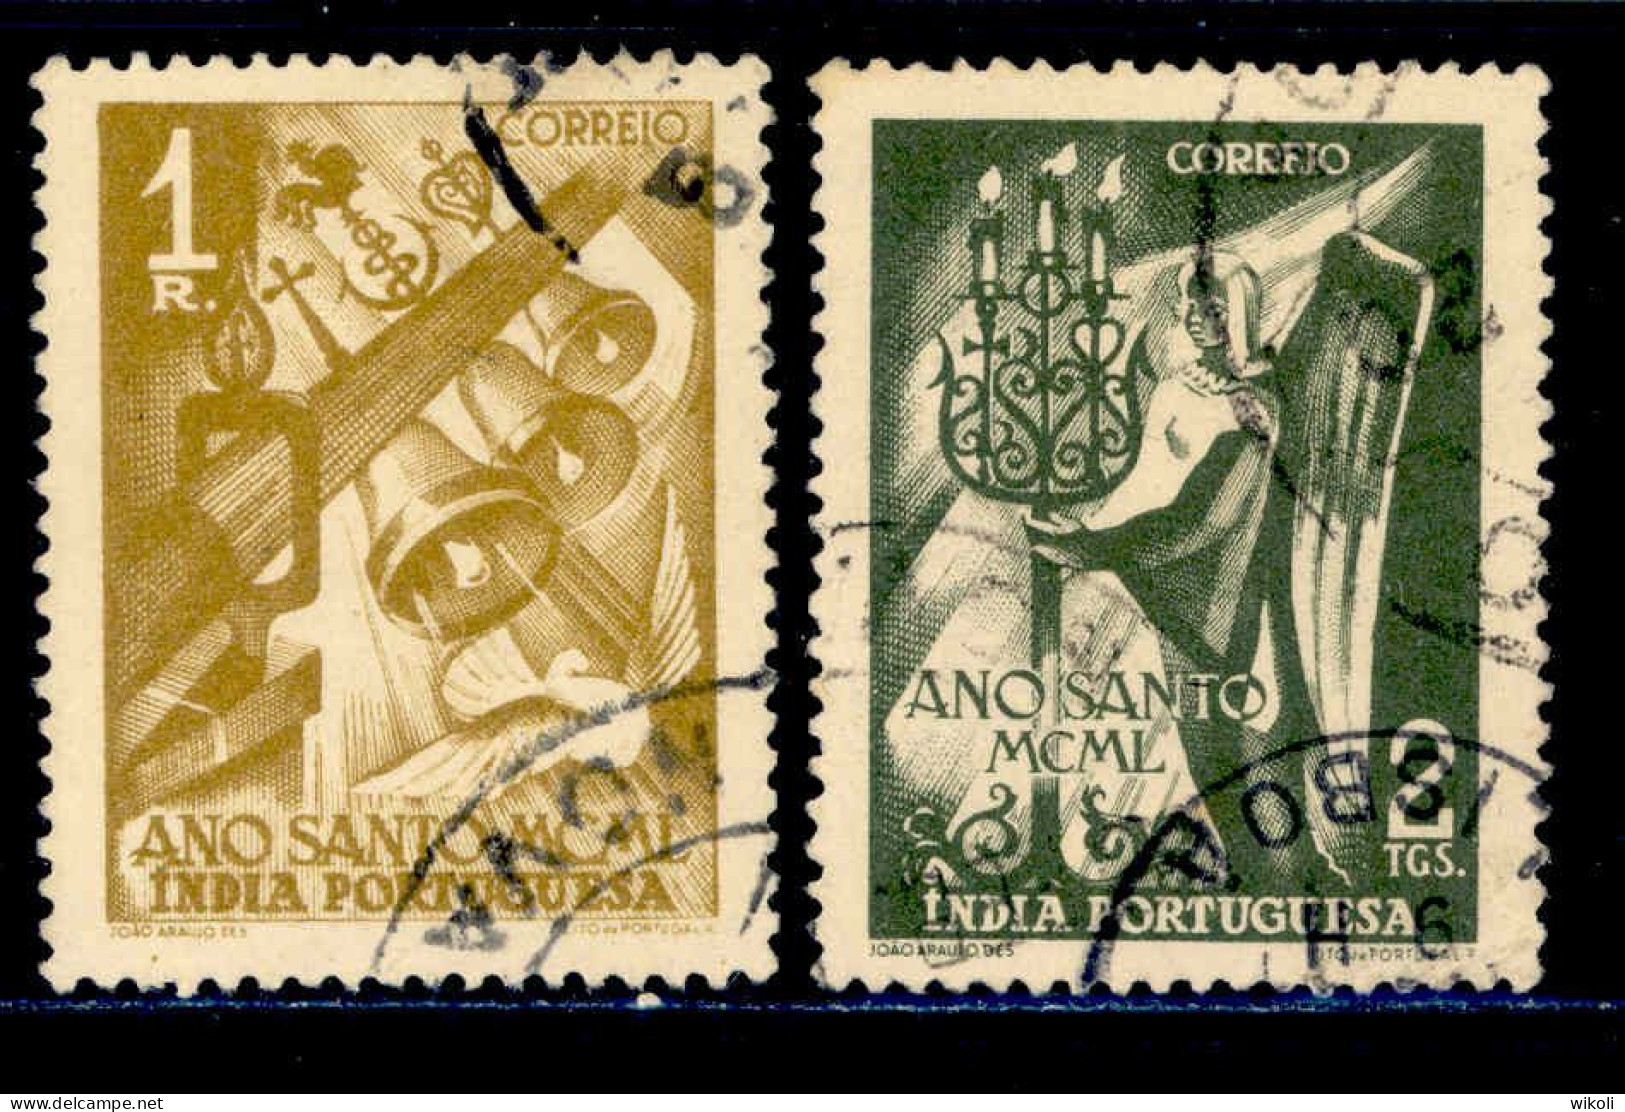 ! ! Portuguese India - 1950 Holy Year (Complete Set) - Af. 405 & 406 - Used - Portuguese India